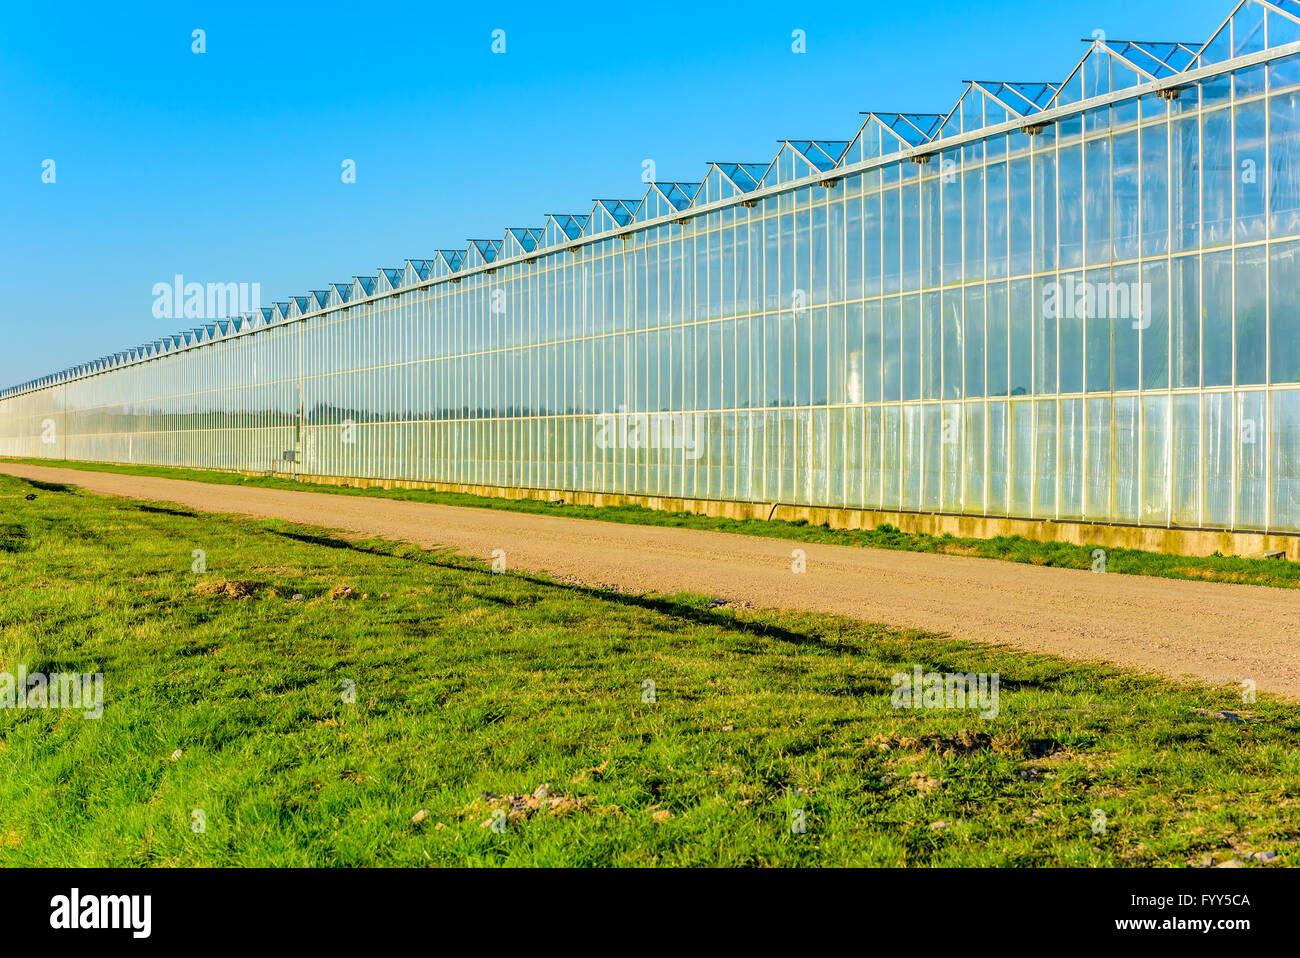 The evening sunshine is making this greenhouse glow with a golden shimmer against a blue sky. Stock Photo